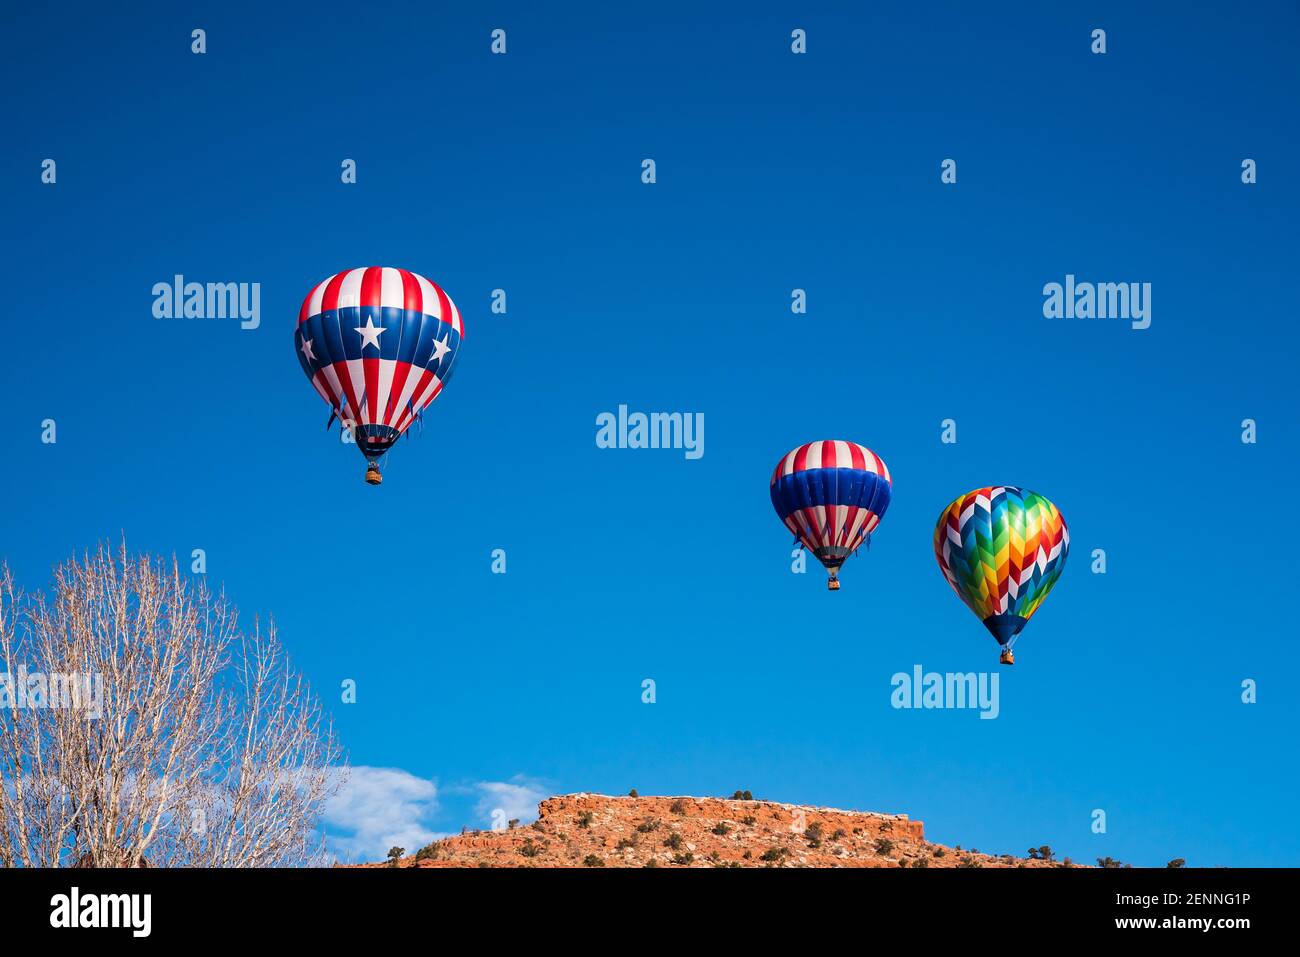 Hot air balloons in the cobalt blue skies above the red rock cliffs of Kanab, Utah, USA.  This small town is famous for its western atmosphere. Stock Photo